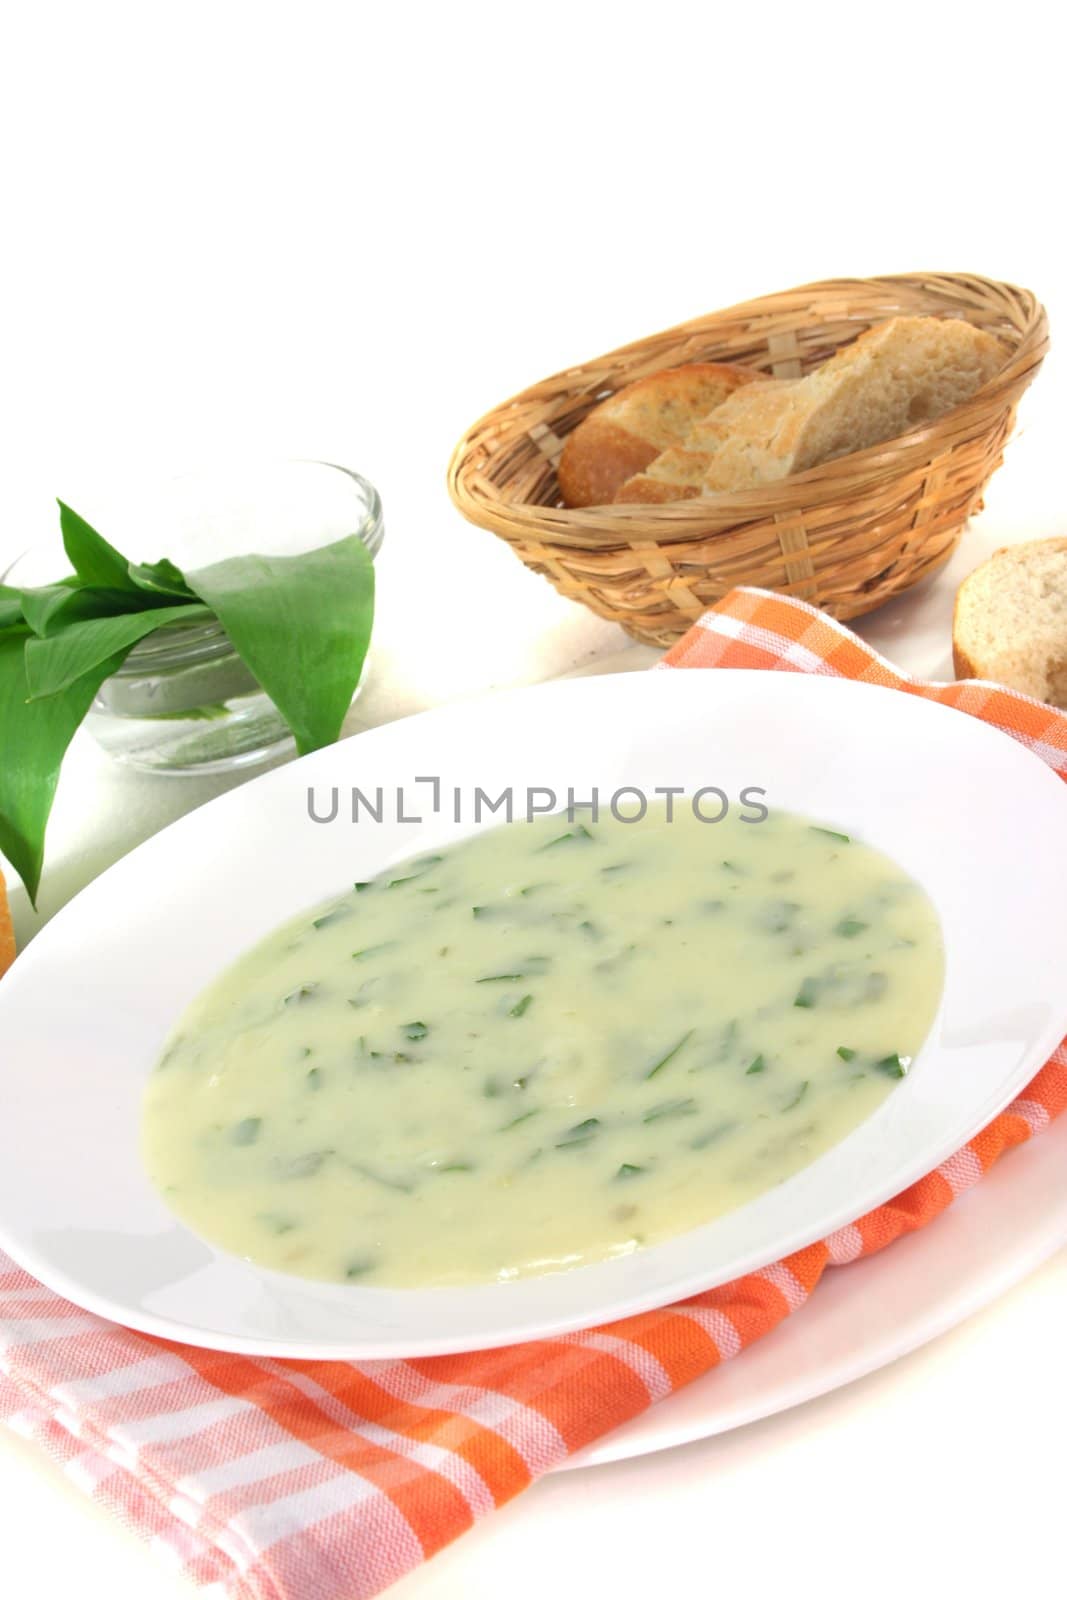 Wild garlic soup by discovery